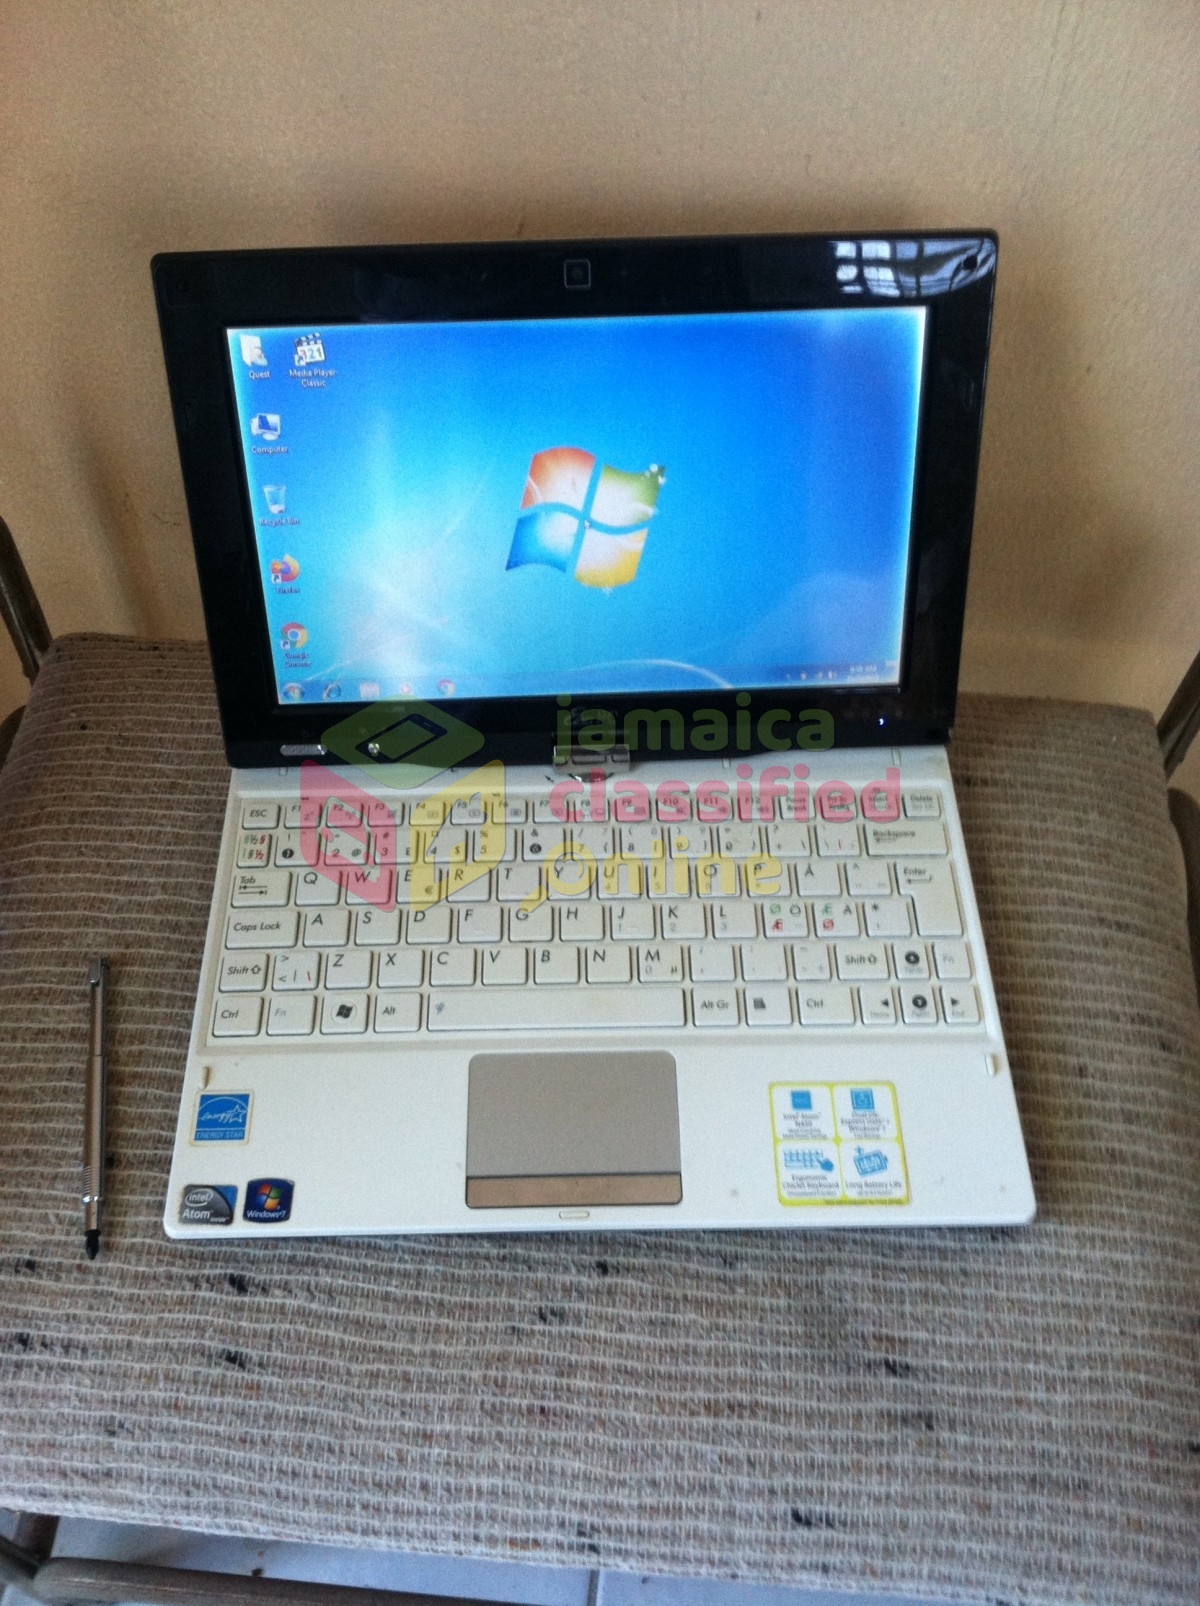 Asus T101MT 10 Inch Touch Screen Laptop Netbook for sale in Ligunea 